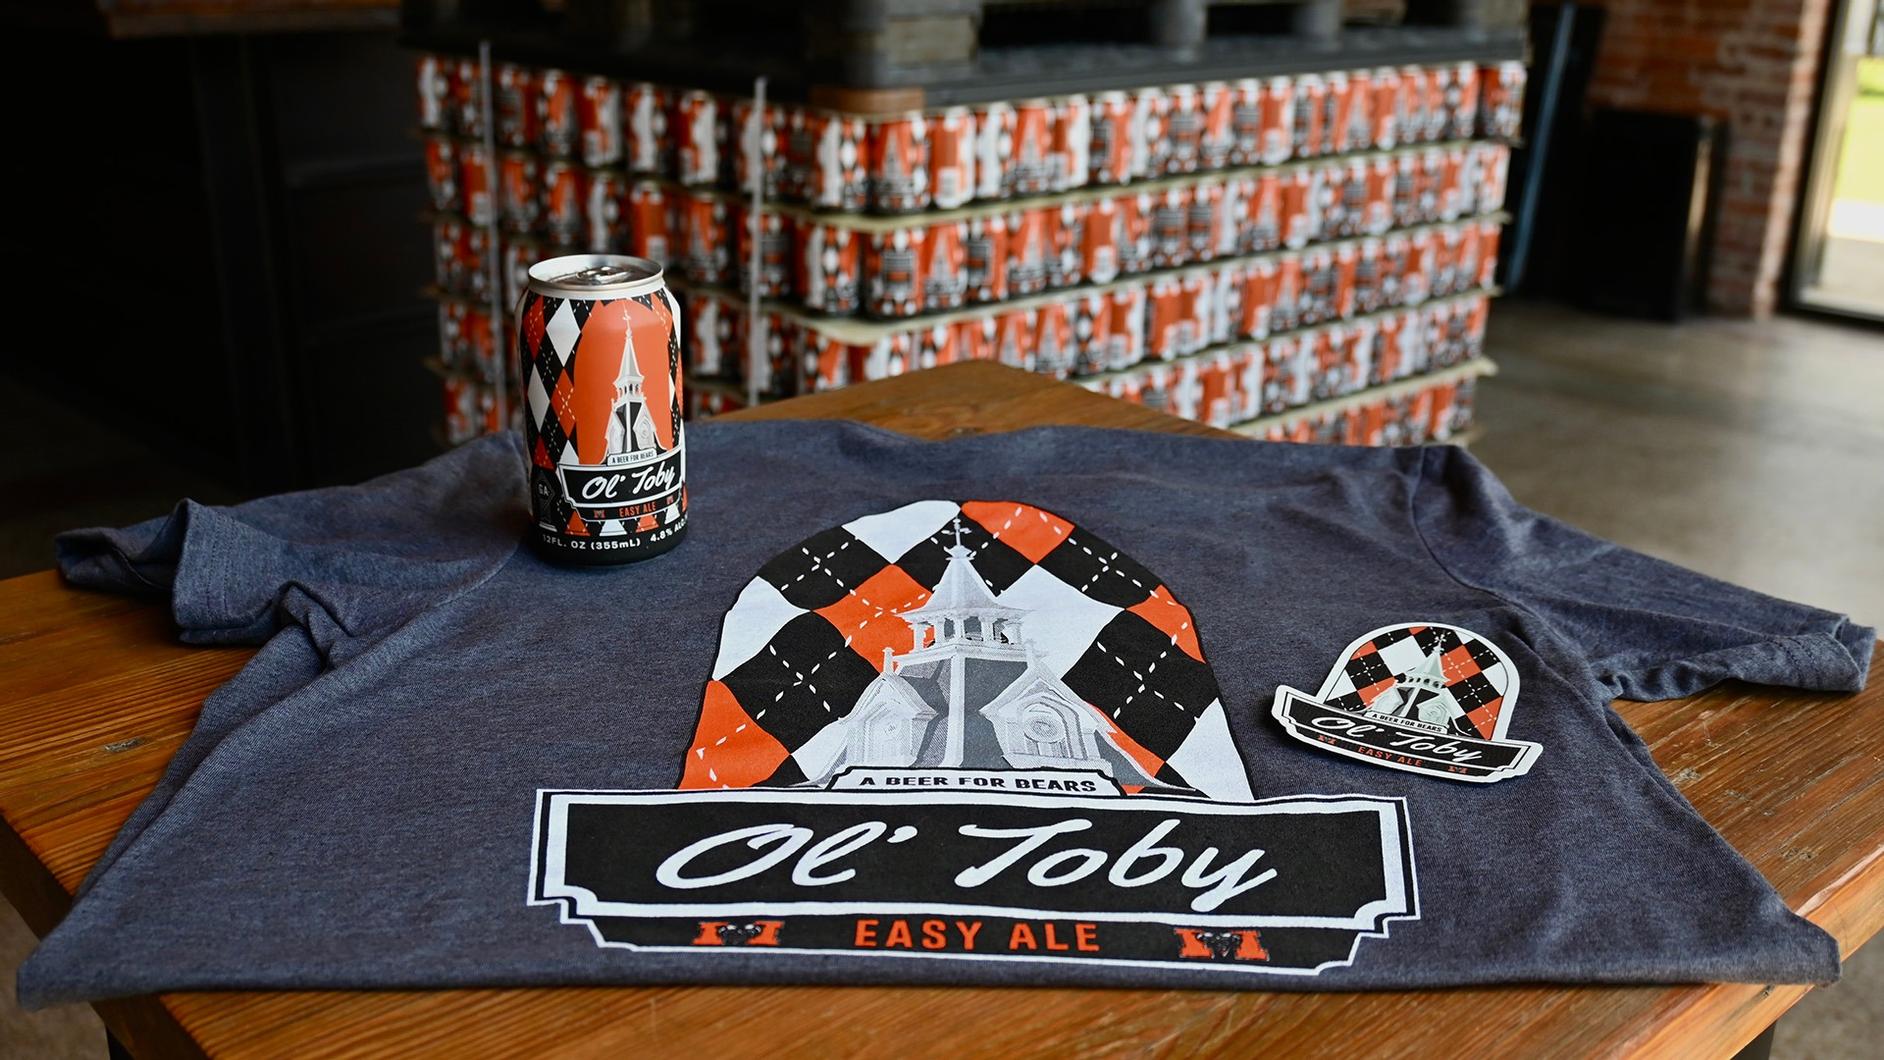 Fall Line to debut Ol' Toby Easy Ale on Sept. 9